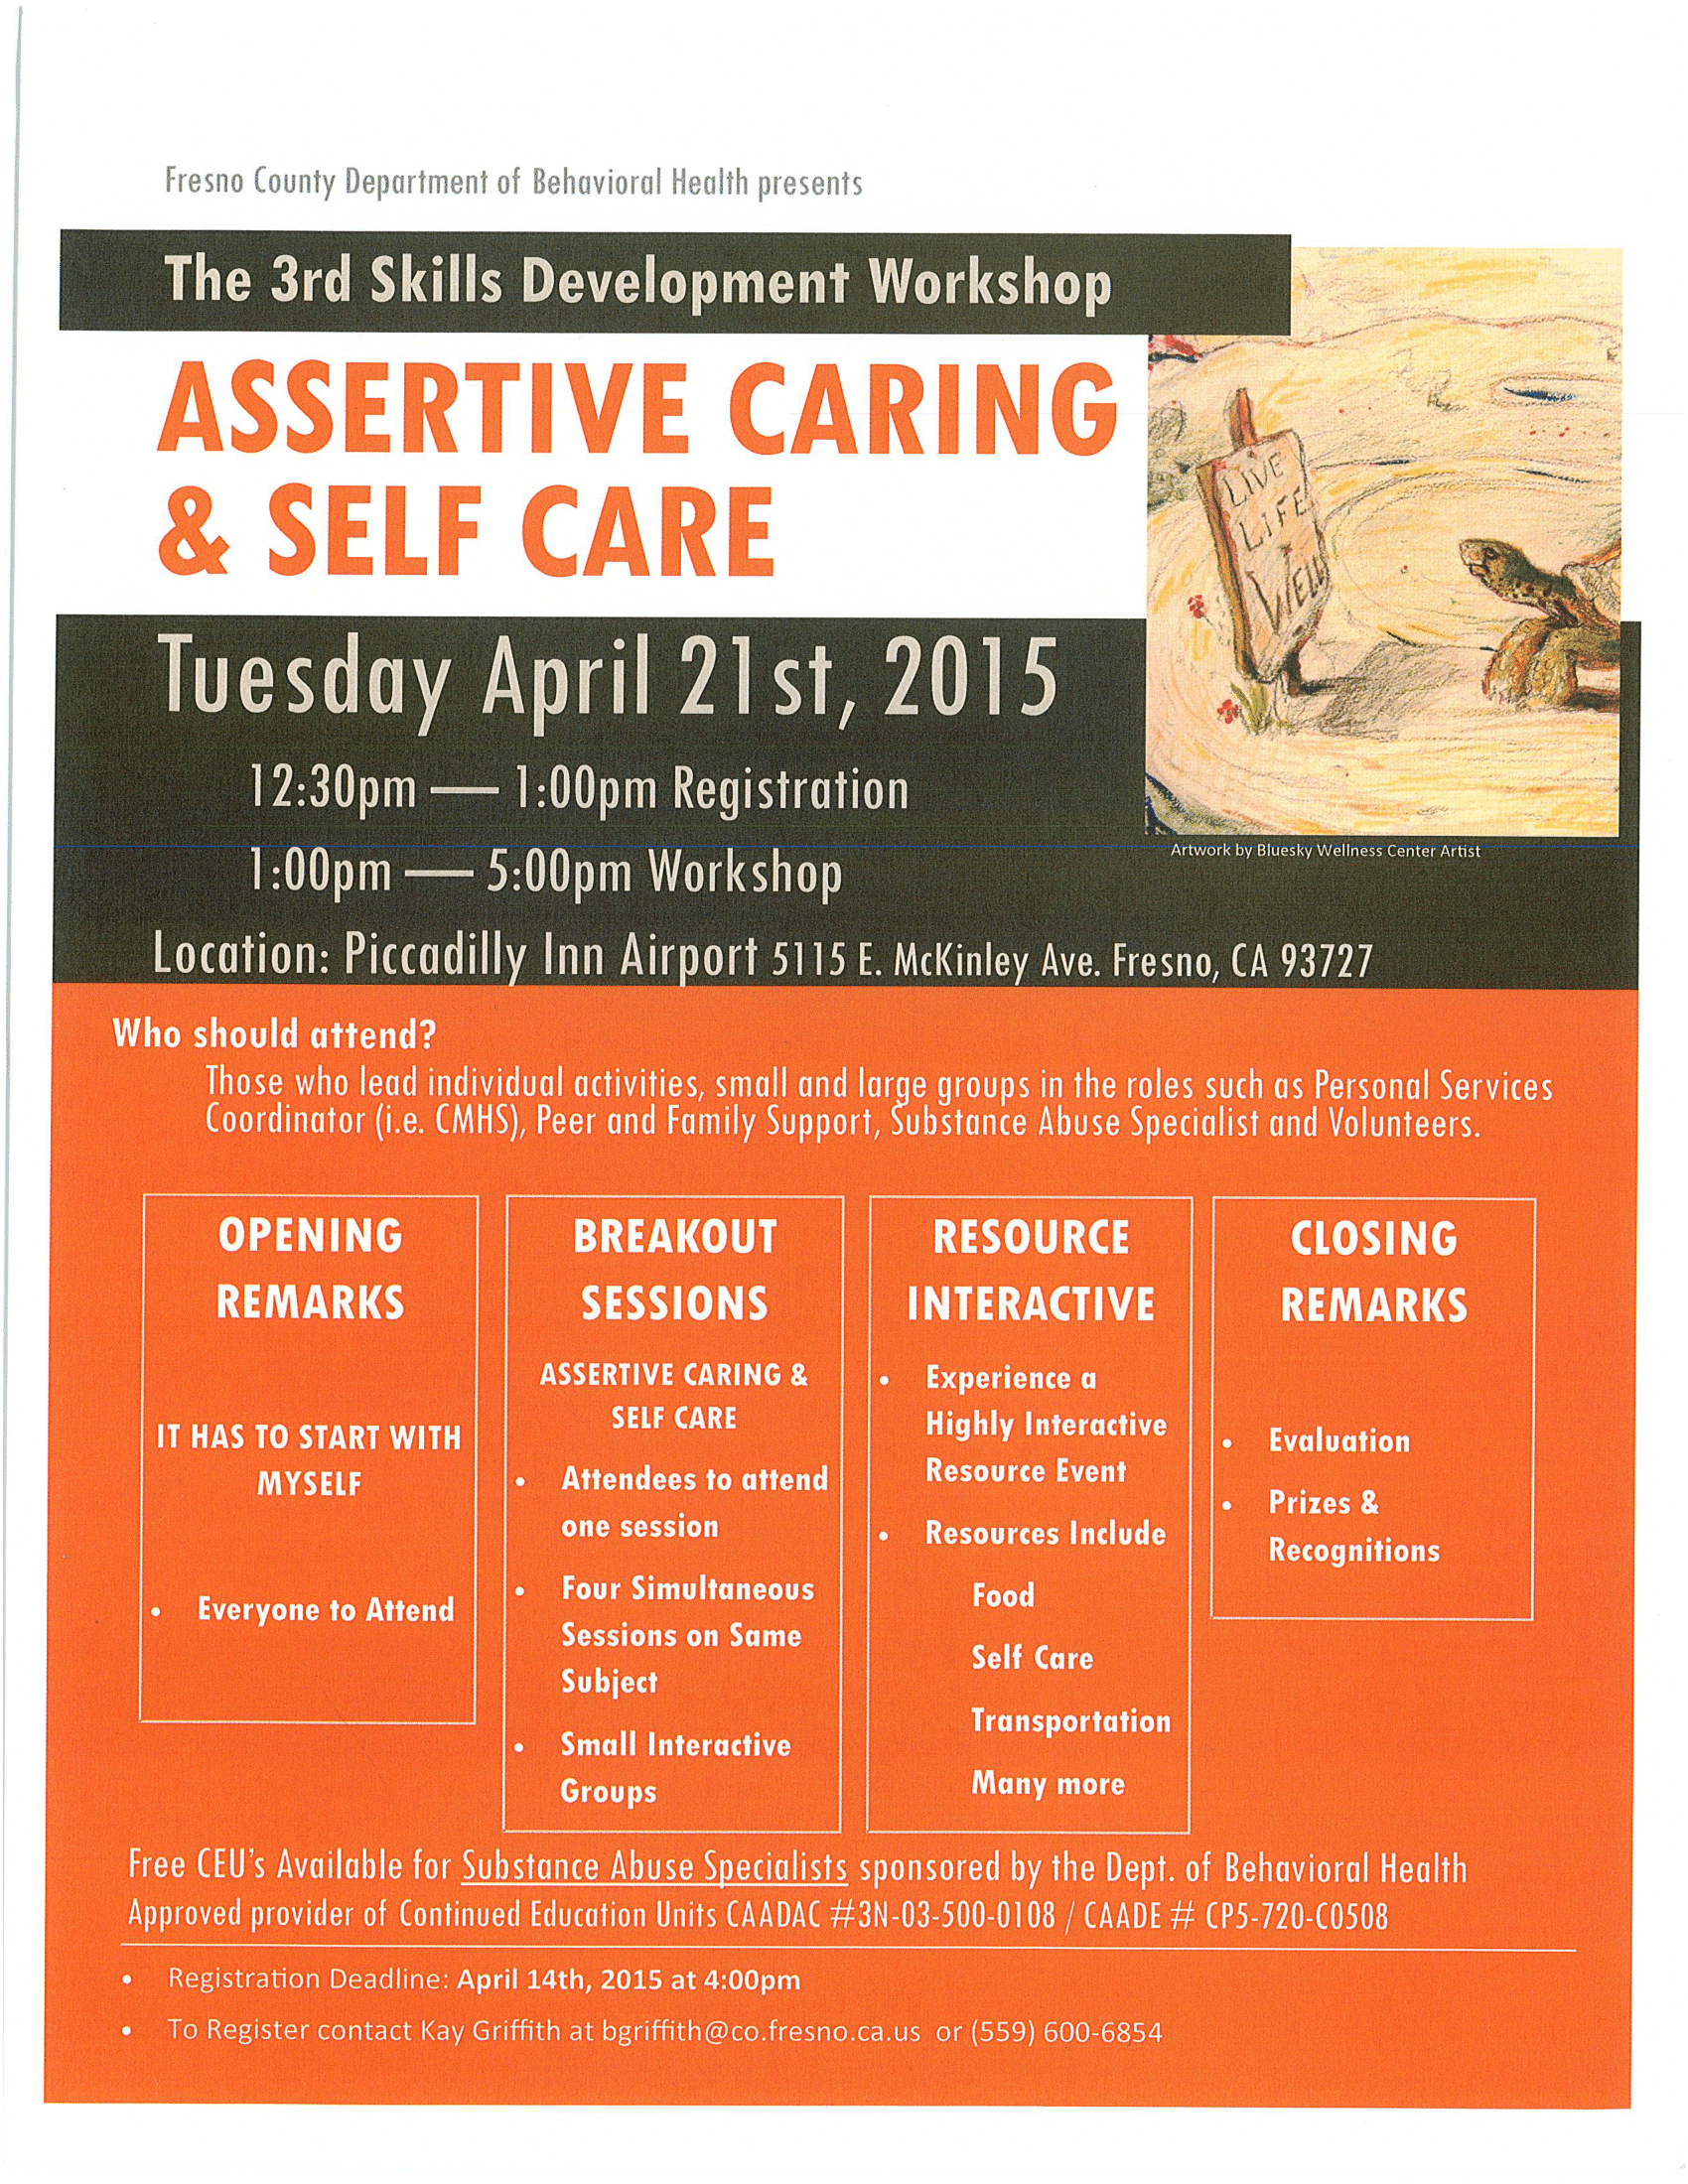 Asserative Caring and Self Care